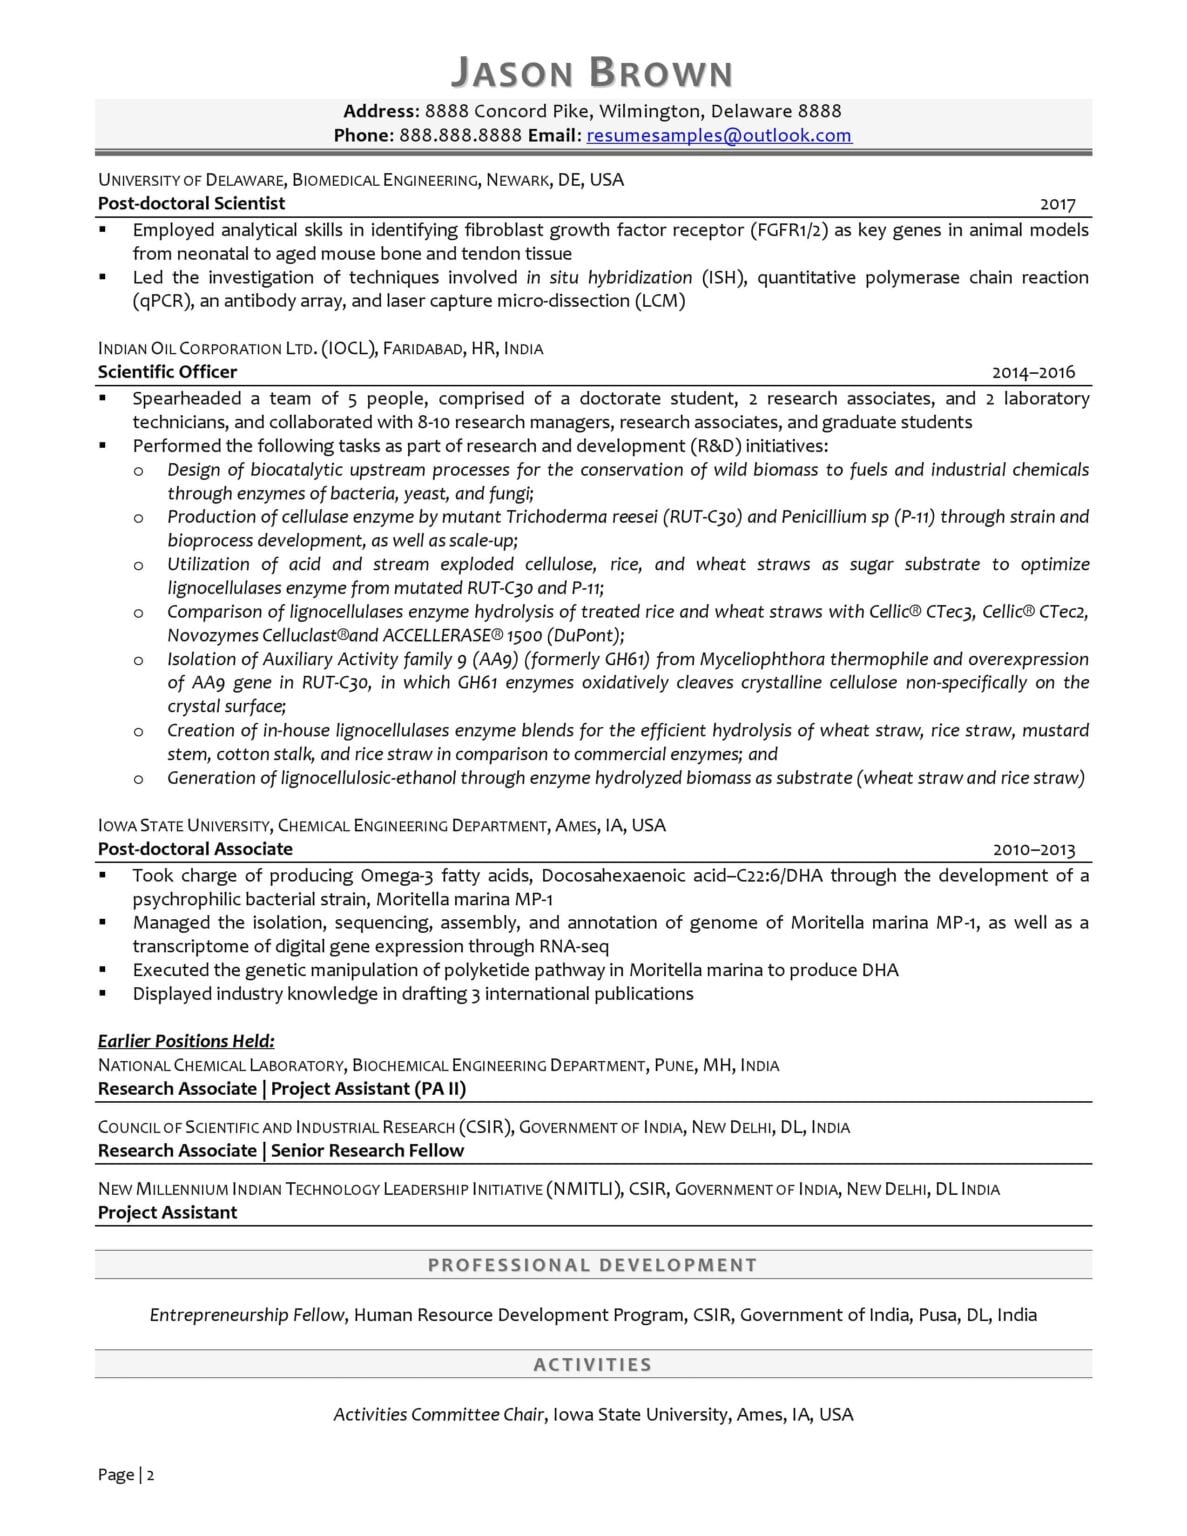 Research Scientist Resume Example | Resume Professional Writers